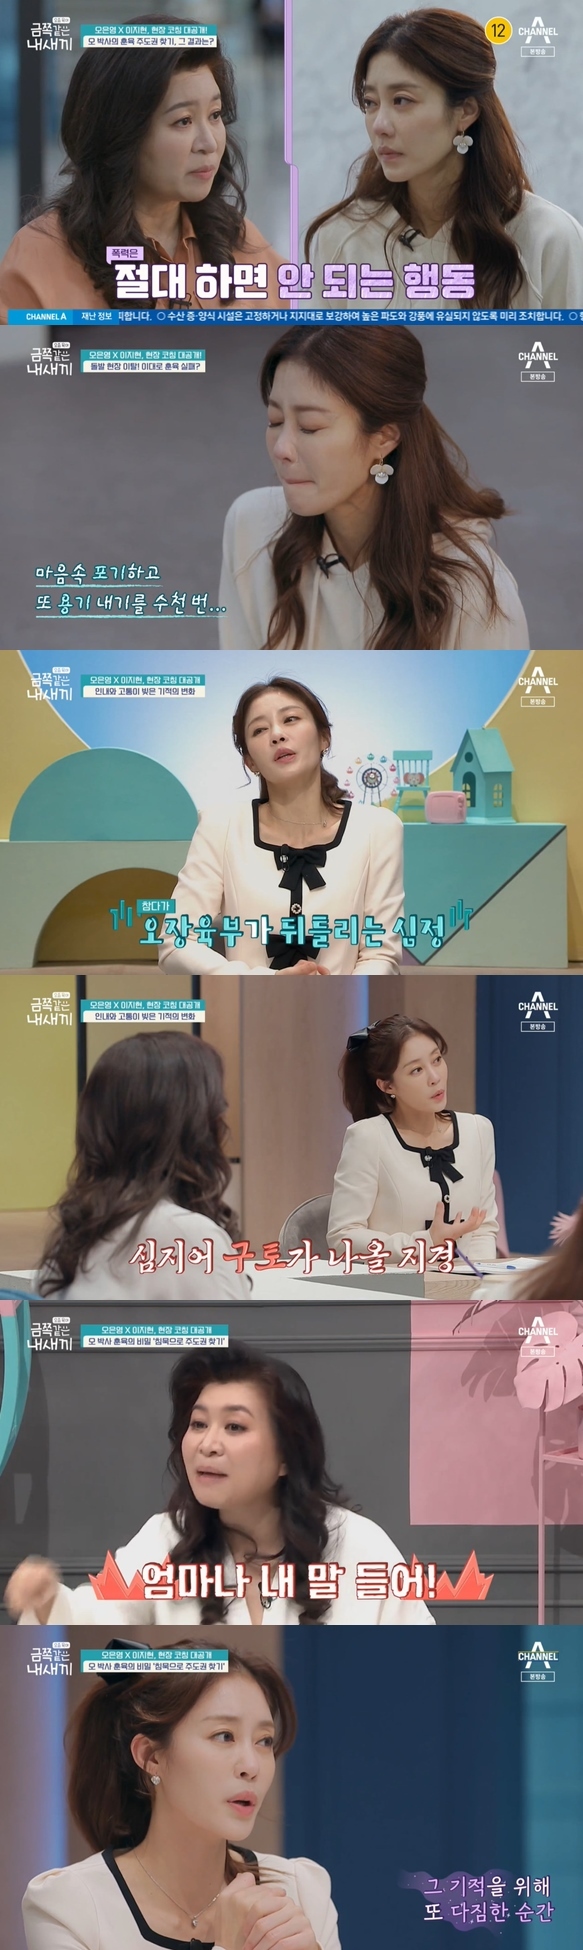 Lee Ji Hyun delivers his feelings after his sons educationChannel A My Little Baby, like a child-rearing gold (hereinafter referred to as Gold) broadcast on the 25th followed the third solution of the Lee Ji Hyun family.On this day, Oh Eun Young Doctorate met Woo Kyung Lee and started coaching one-on-one.Woo Kyung-i, who grabbed her mothers hair and kicked her, was seen apologizing to Lee Ji Hyun after a long discipline.The cast applauded Woo Kyung-is changed appearance, with Lee Ji Hyun thanking him for this is real magic.Hong Hyon-hee said: I did an analysis as a prospective mother, Oh Eun Young Doctorates voice tone was constant, and the second is charisma.The third is the patience that waits - I think these three are the points, he said.After training to find discipline initiative, Lee Ji Hyun said, I think the five-legged man is twisted. It was like vomiting. It was so sick and hard.Oh Eun Young said, I met in a comfortable place to talk to Woo Kyung, and Woo Kyung was evil before the start.At first, I was going to take him away, but I ran to my mother and hit him. This situation is not a situation of conversation, but a discipline about hitting my mother.Woo Kyung is not ready to understand the words, but is not ready to accept the teachings.I have to listen to something important, but I am not listening, but I am trying to control this situation. It was too important to teach the first step to Woo Kyung.The instructions should be concise and clear, he added.Oh Eun Young also said, My mother follows the inappropriate control of the child.It was a long time, but I saw the fire of hope. When I asked him to sit back, he went back a little.It was the first button to accept adult instructions. Oh Eun Young said, I finished and packed my luggage and I was in front of the right.I learned something important today, he said, Goodbye and said hello.Lee Ji Hyun said, I thought that the miracle happened, and for this miracle, my five-pieces could be blown up.I thought I should teach my child unconditionally. Photo: Channel A broadcast screen